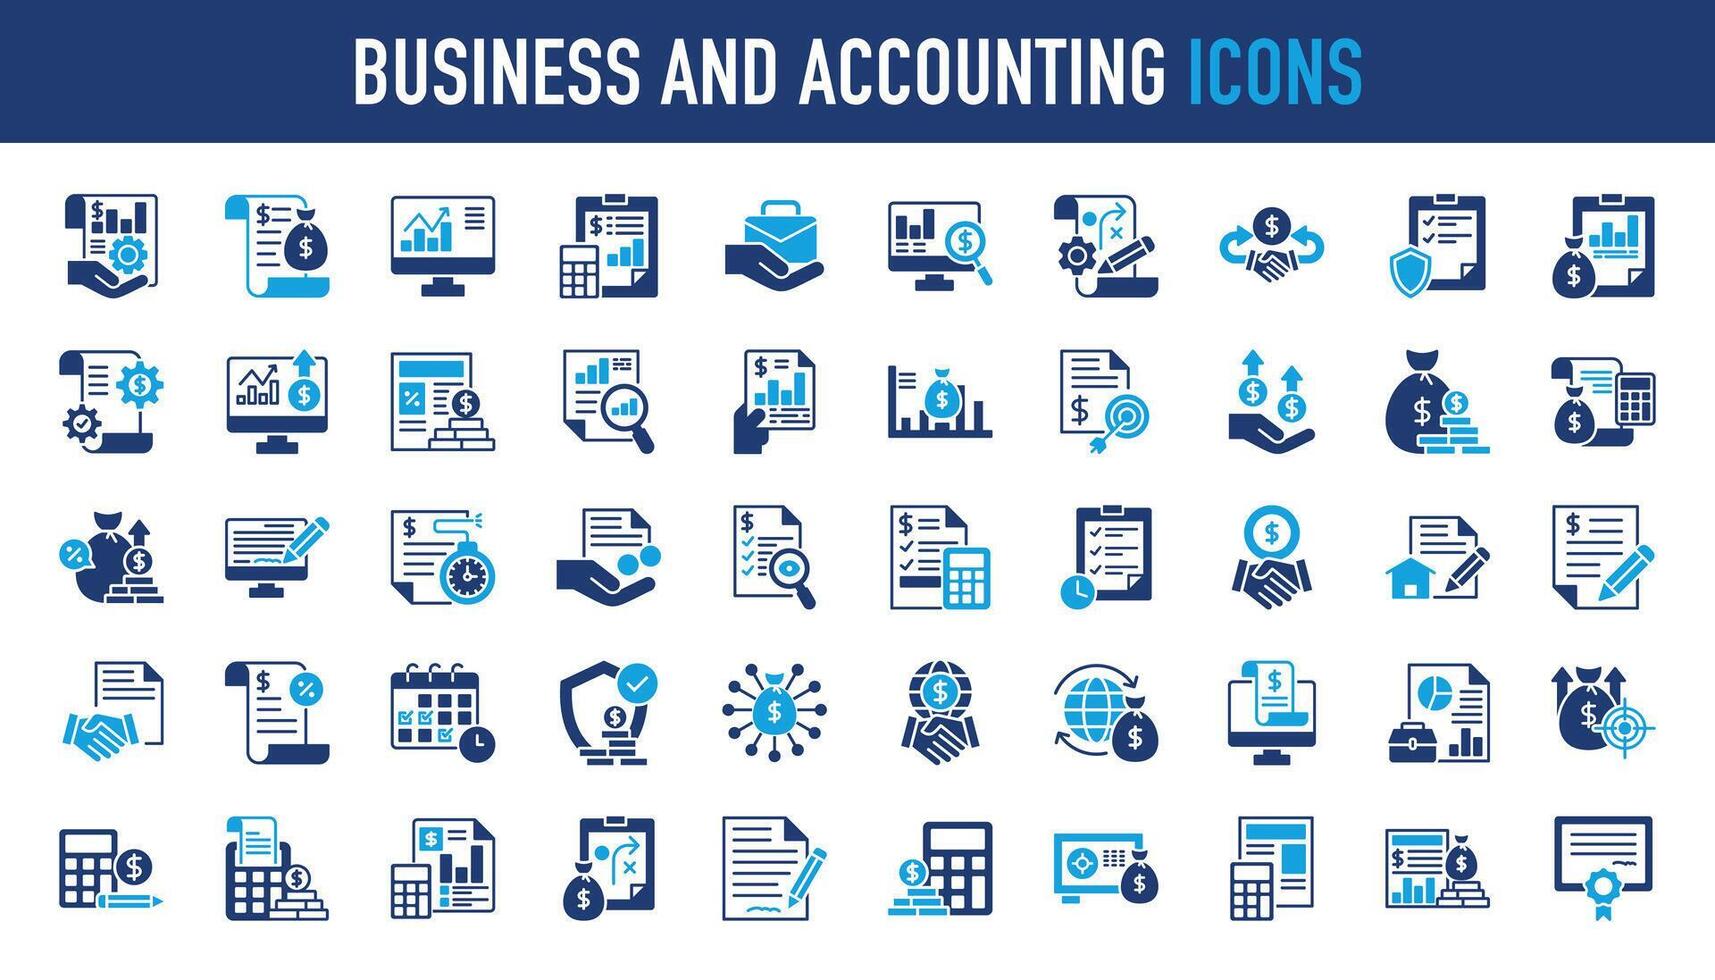 Business and accounting icon set. Containing financial statement, accountant, financial audit, invoice, tax calculator, business firm, tax return, income and balance sheet icons. Vector illustration.